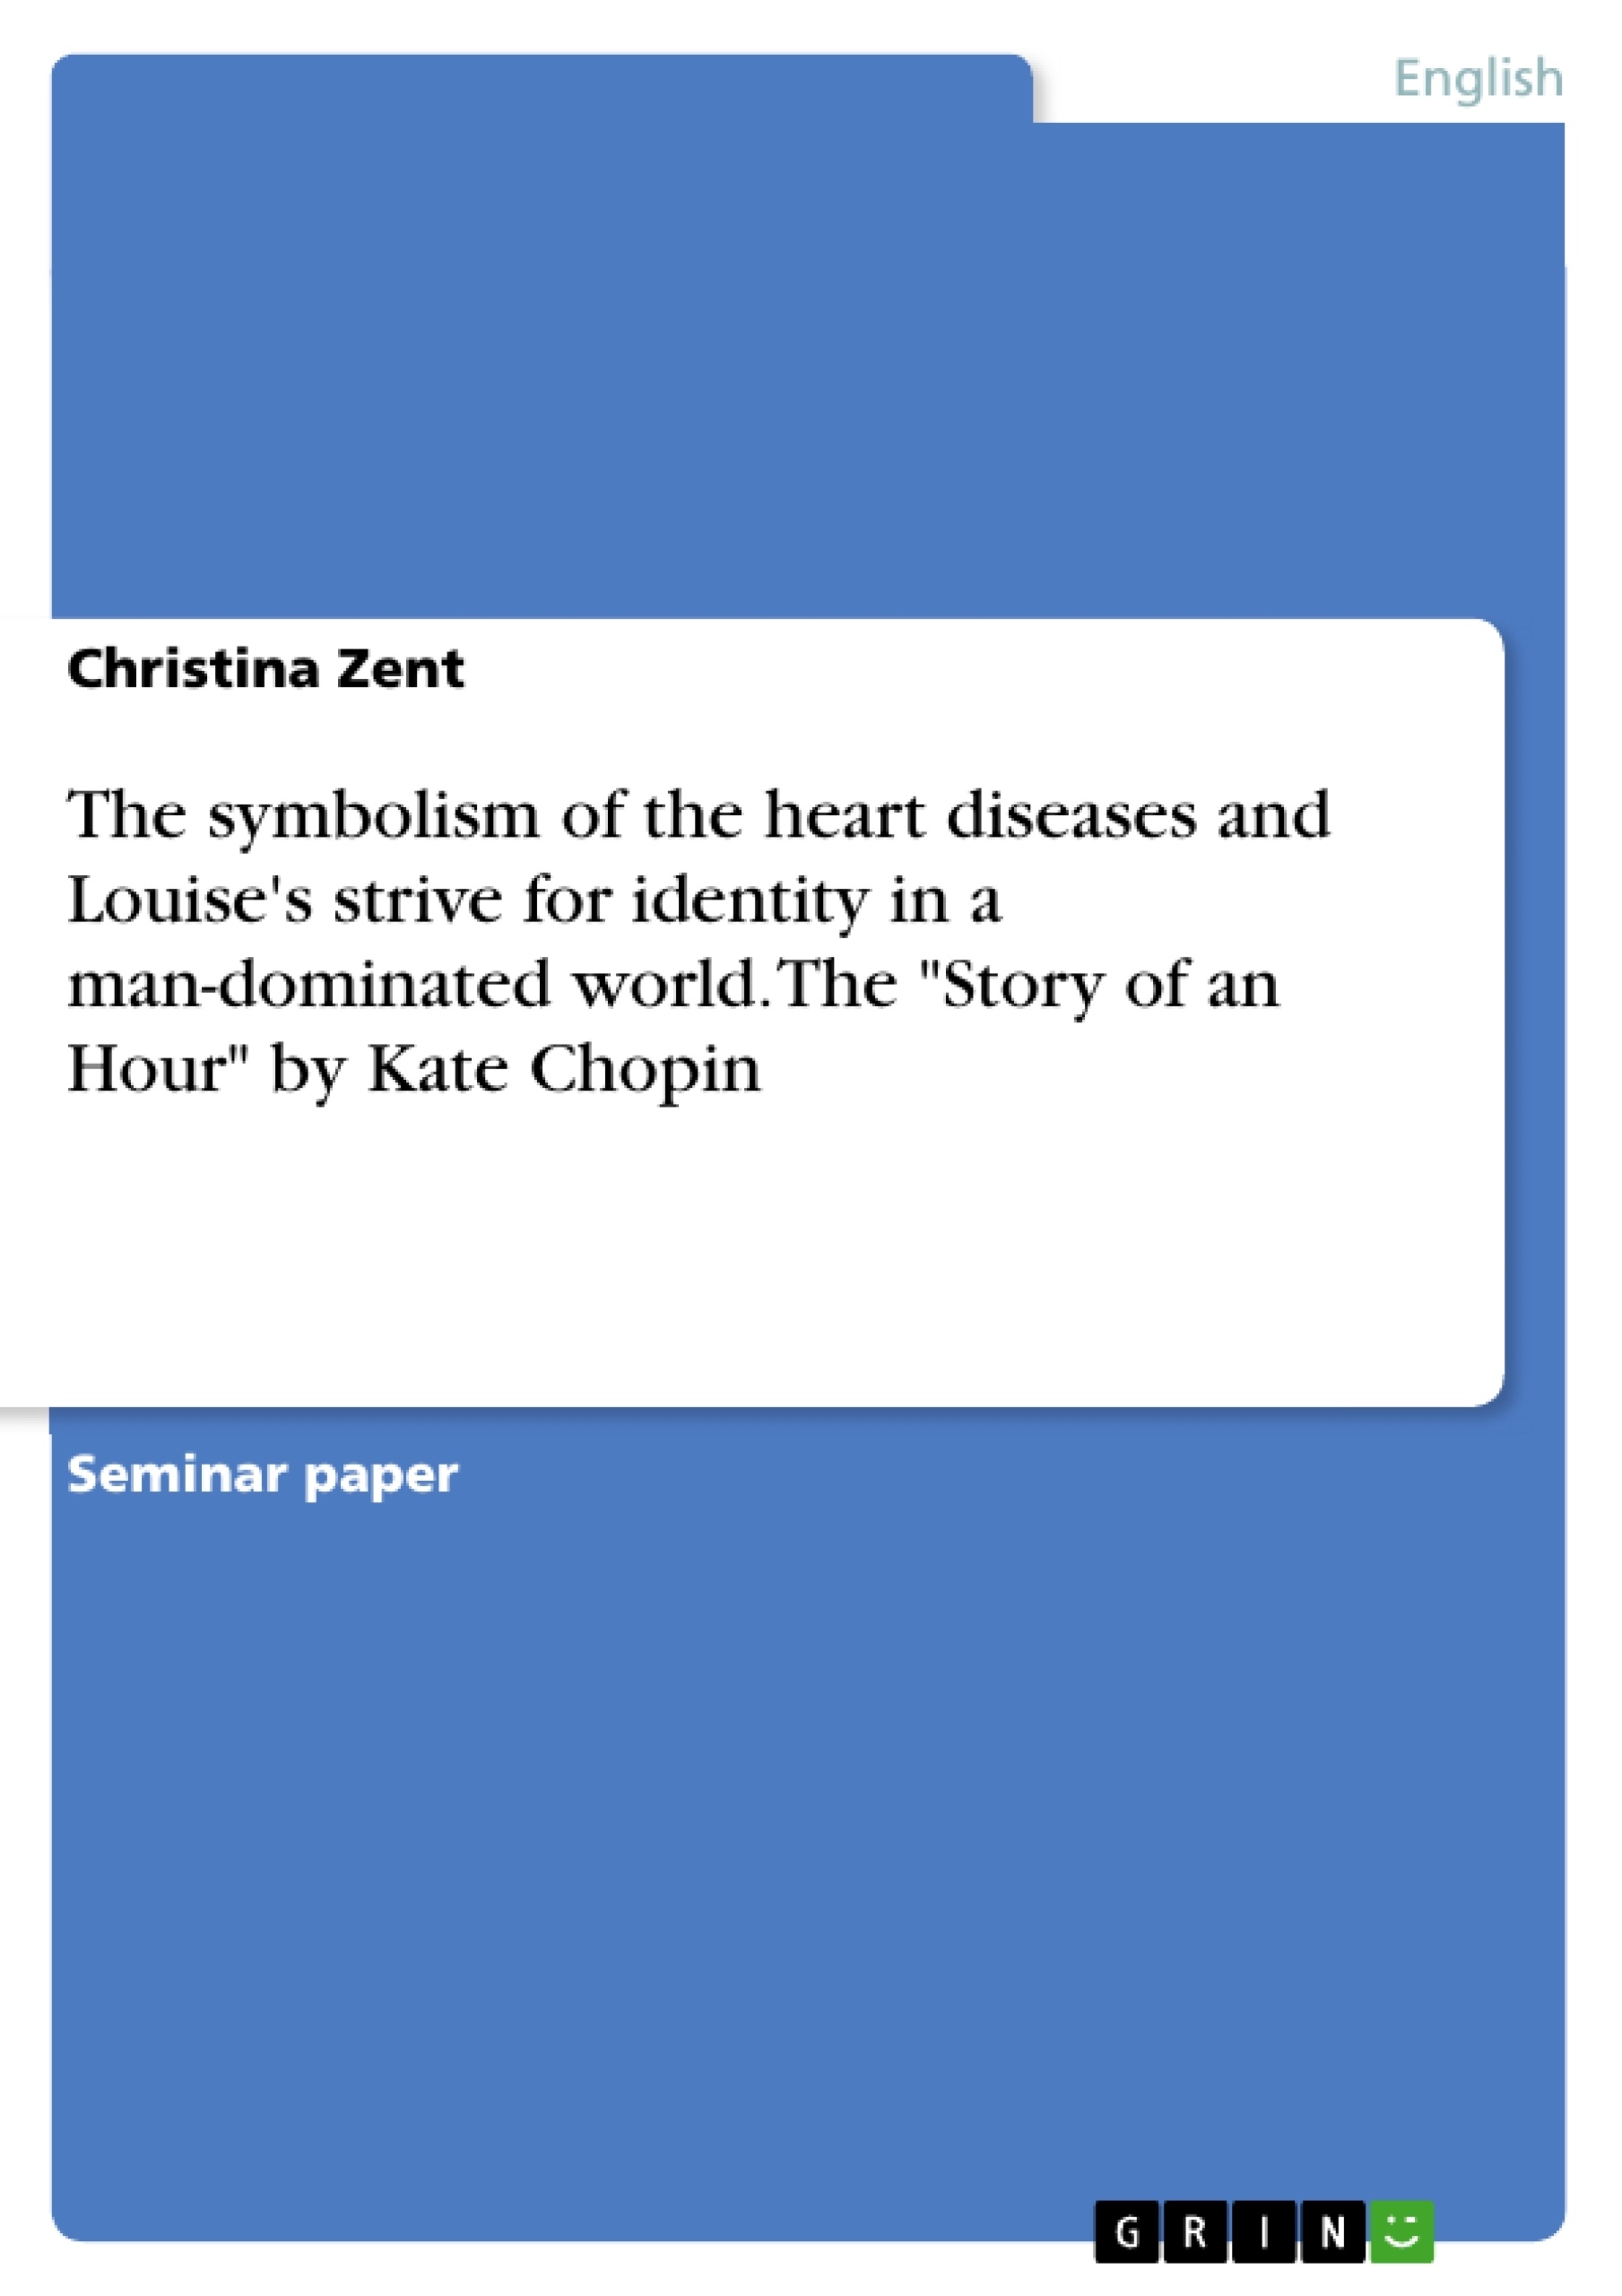 Title: The symbolism of the heart diseases and Louise's strive for identity in a man-dominated world. The "Story of an Hour" by Kate Chopin